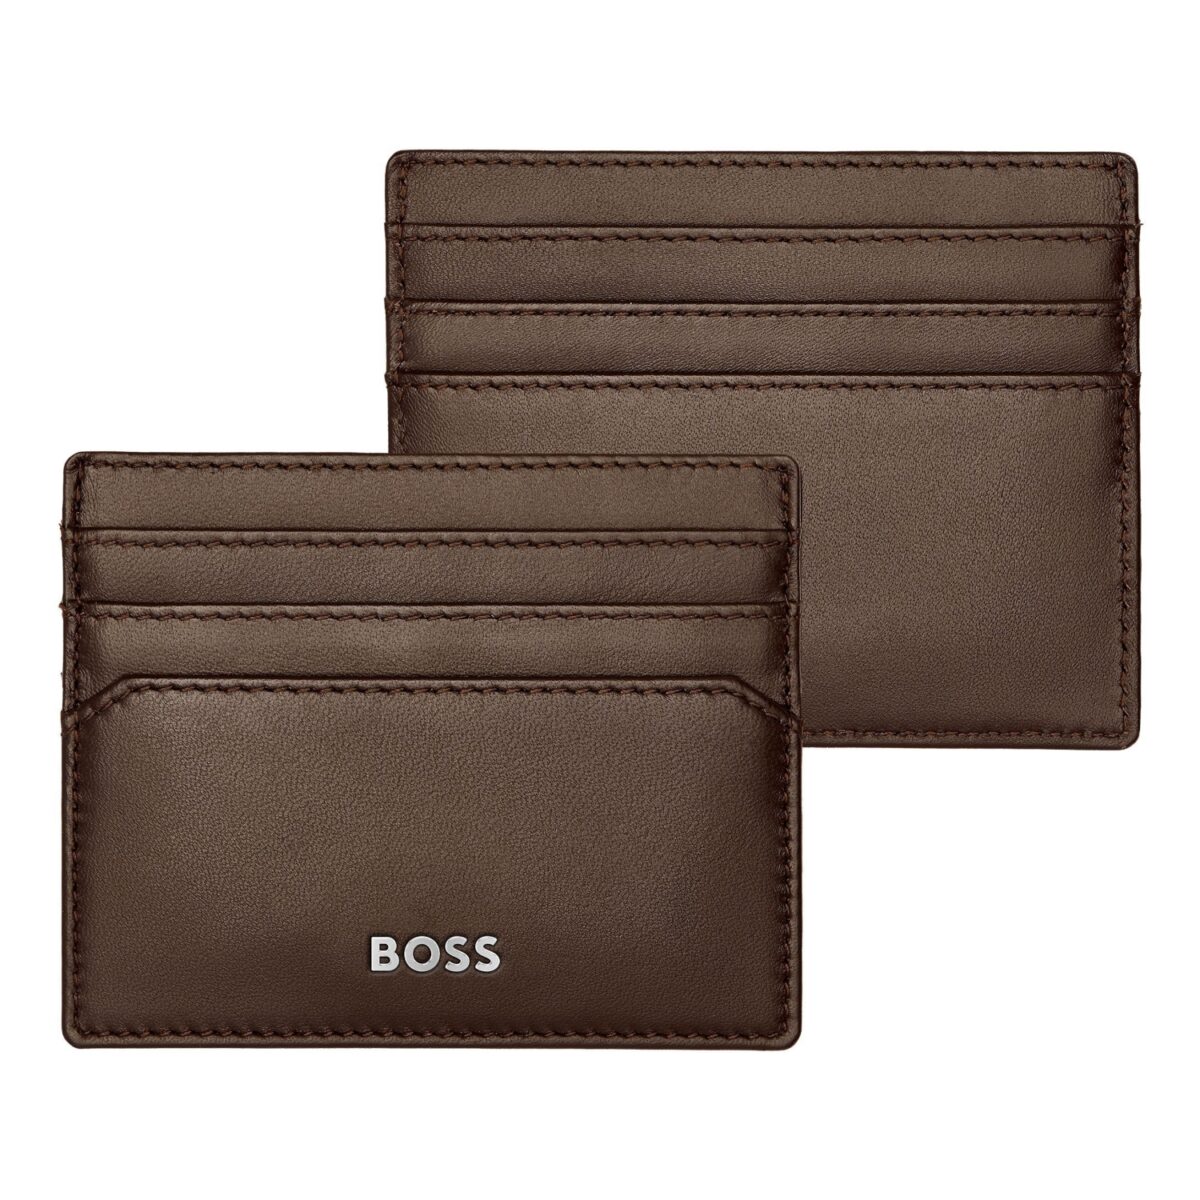 Jewellers - HUGO BOSS Καρτοθήκη Classic Smooth Brown HLC403Y